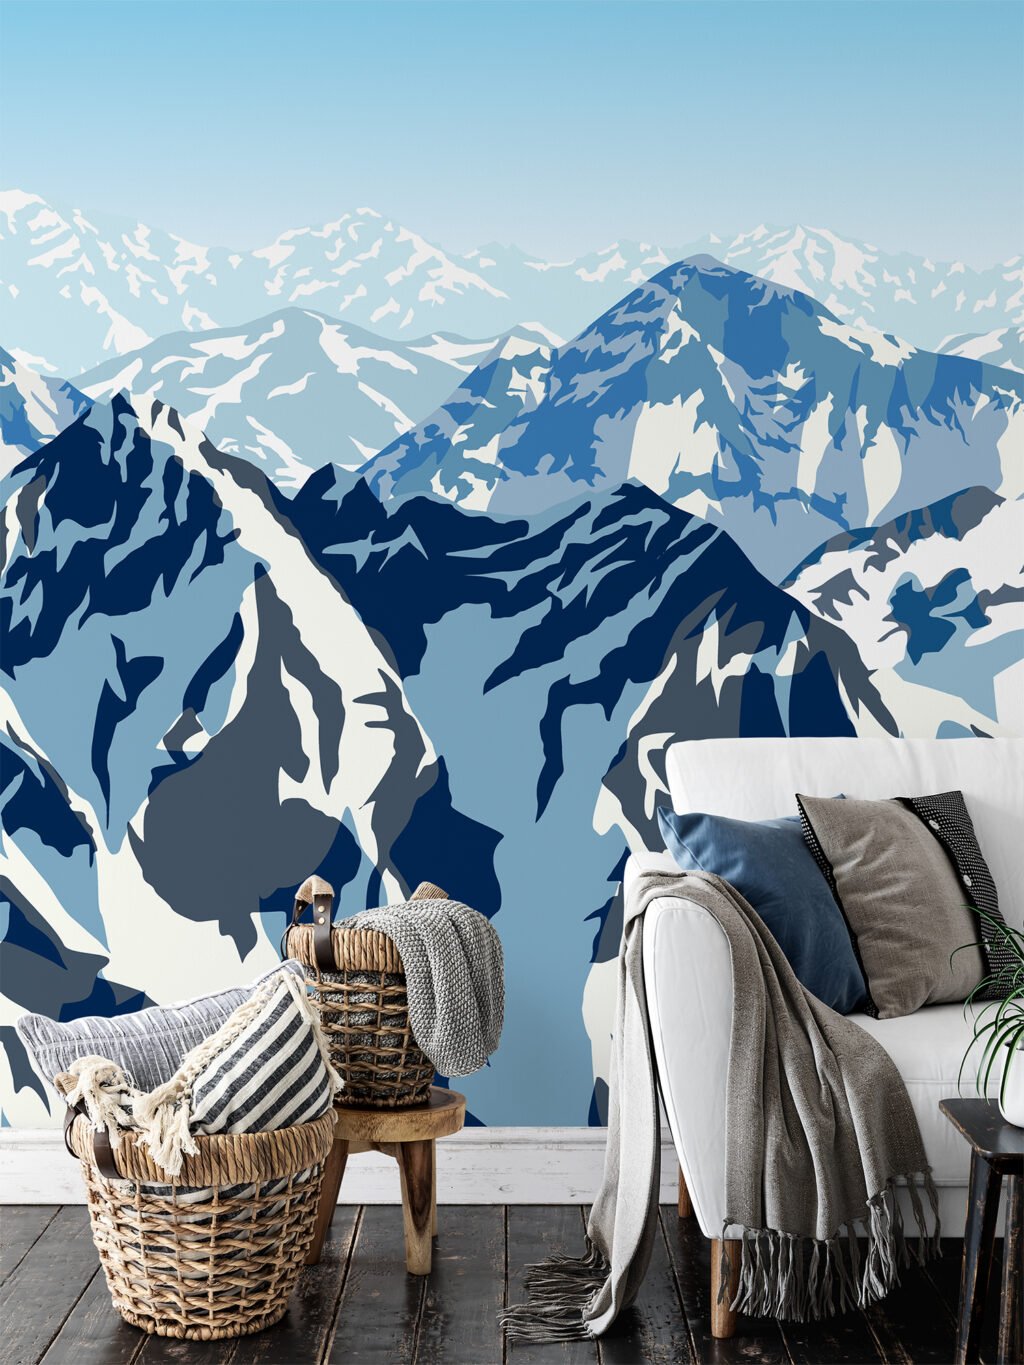 Abstract Flat Art Snowy Mountains Illustration Wallpaper, Blue Mountains Landscape Peel & Stick Wall Mural